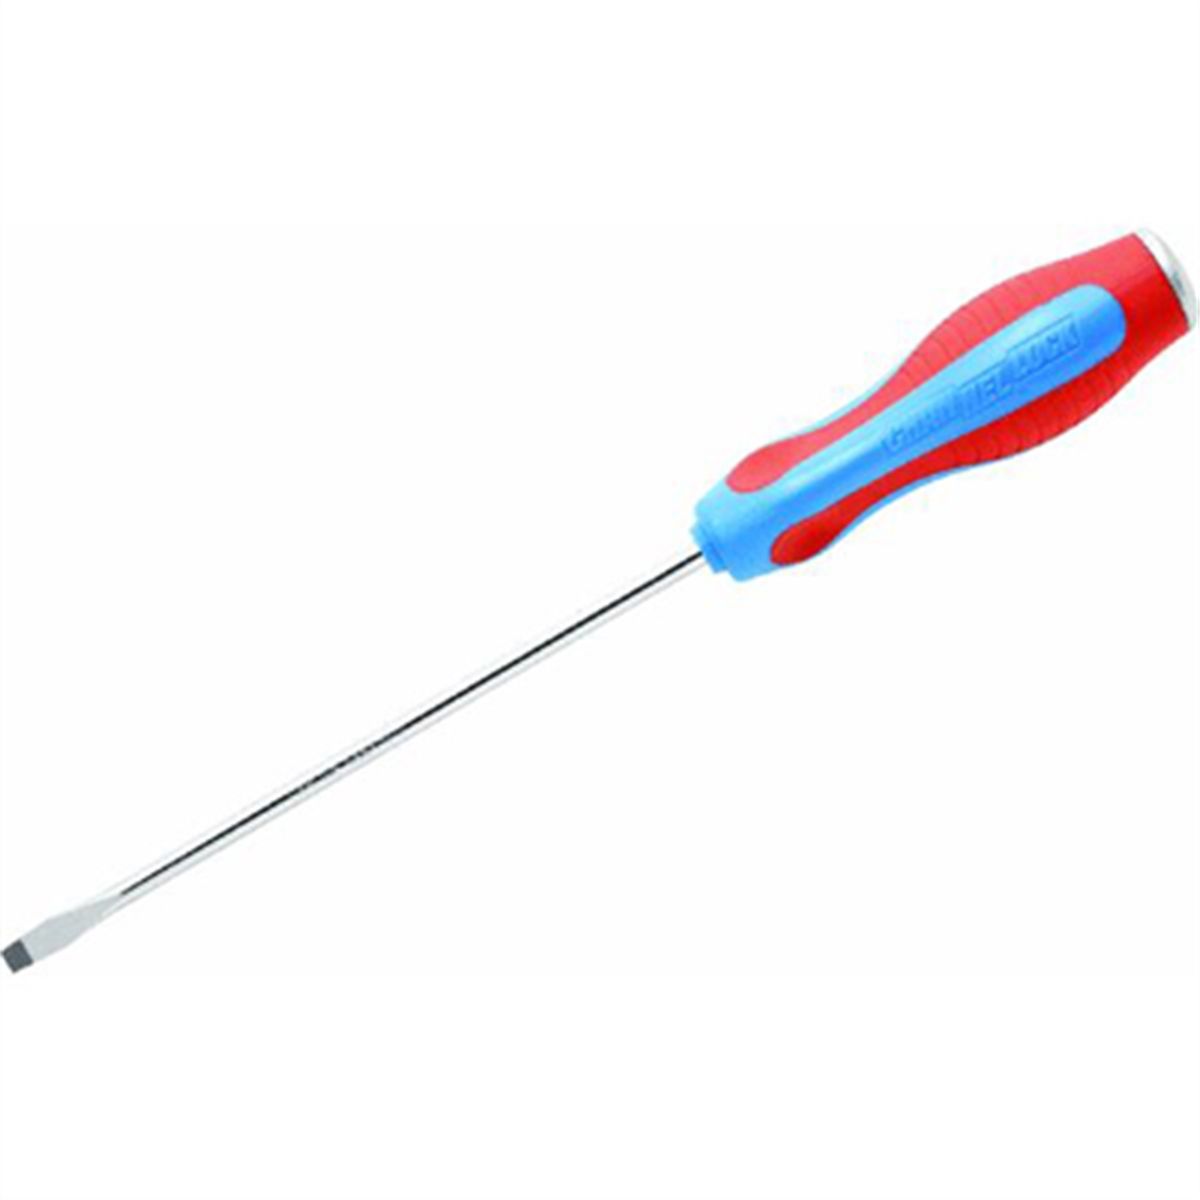 3/16" X 4" Slotted Screwdriver